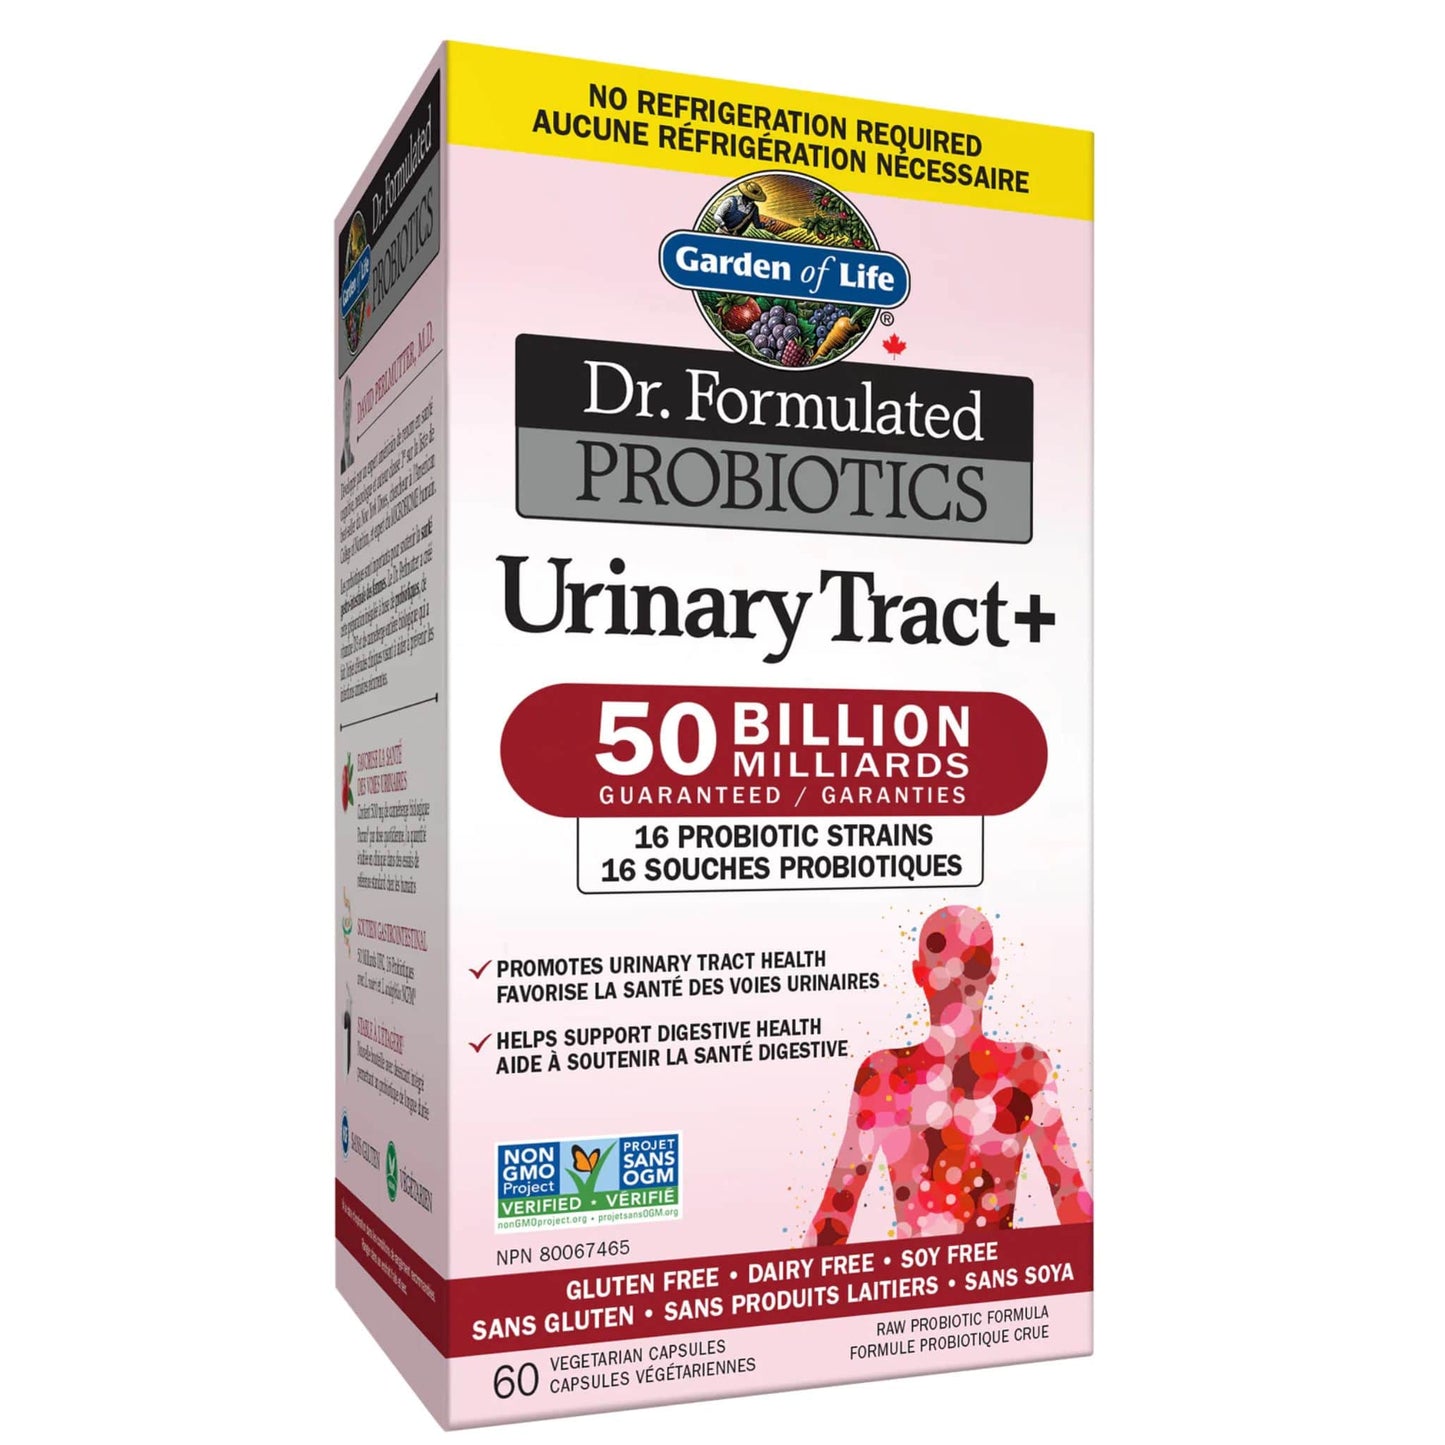 60 Vegetable Capsules | Garden of Life Dr. Formulated Probiotics Urinary Tract Plus 50 Billion